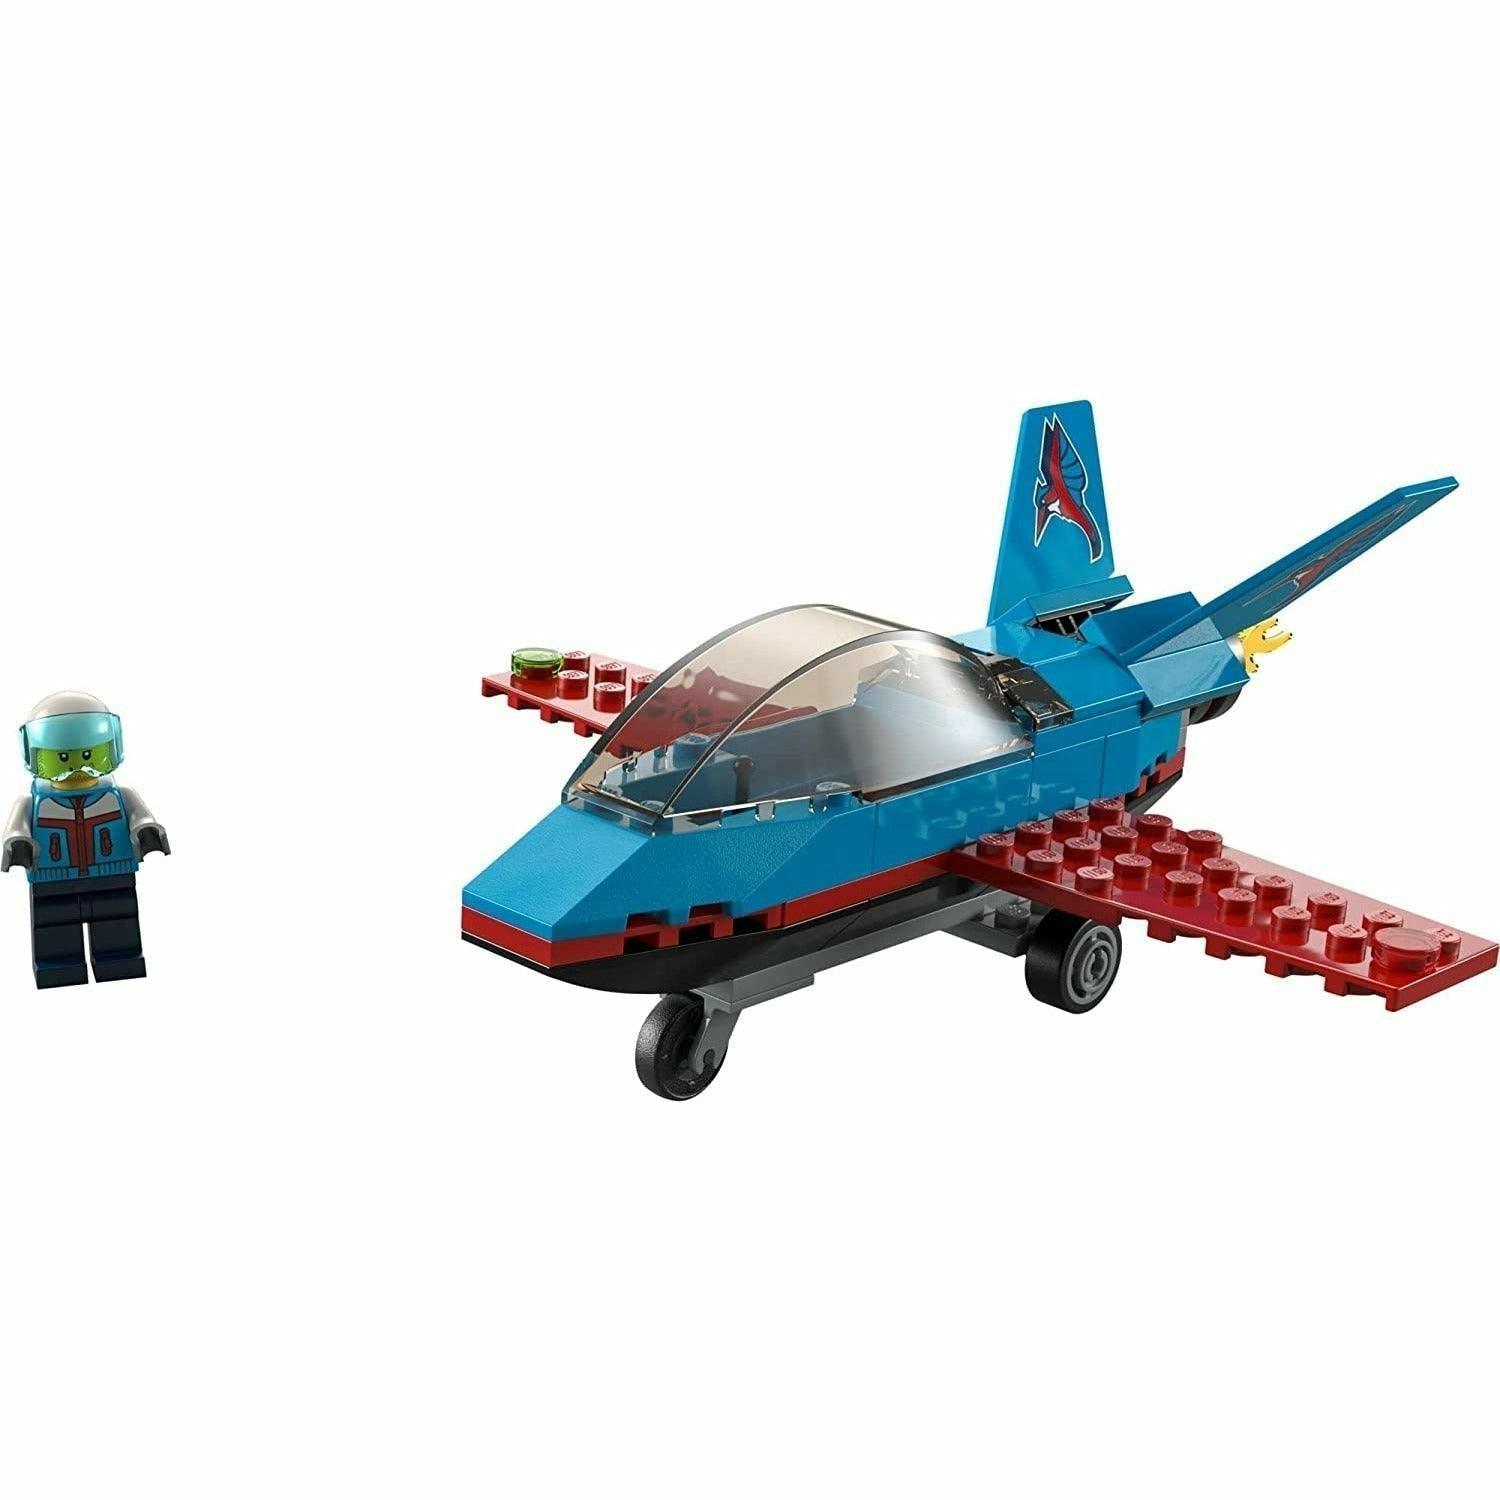 LEGO City Stunt Plane 60323 Building Kit; Toy Jet with Decorated Tail Fins and an Opening Cockpit, Plus a Pilot Minifigure with a Helmet (59 Pieces) - BumbleToys - 5-7 Years, Boys, City, EXO, LEGO